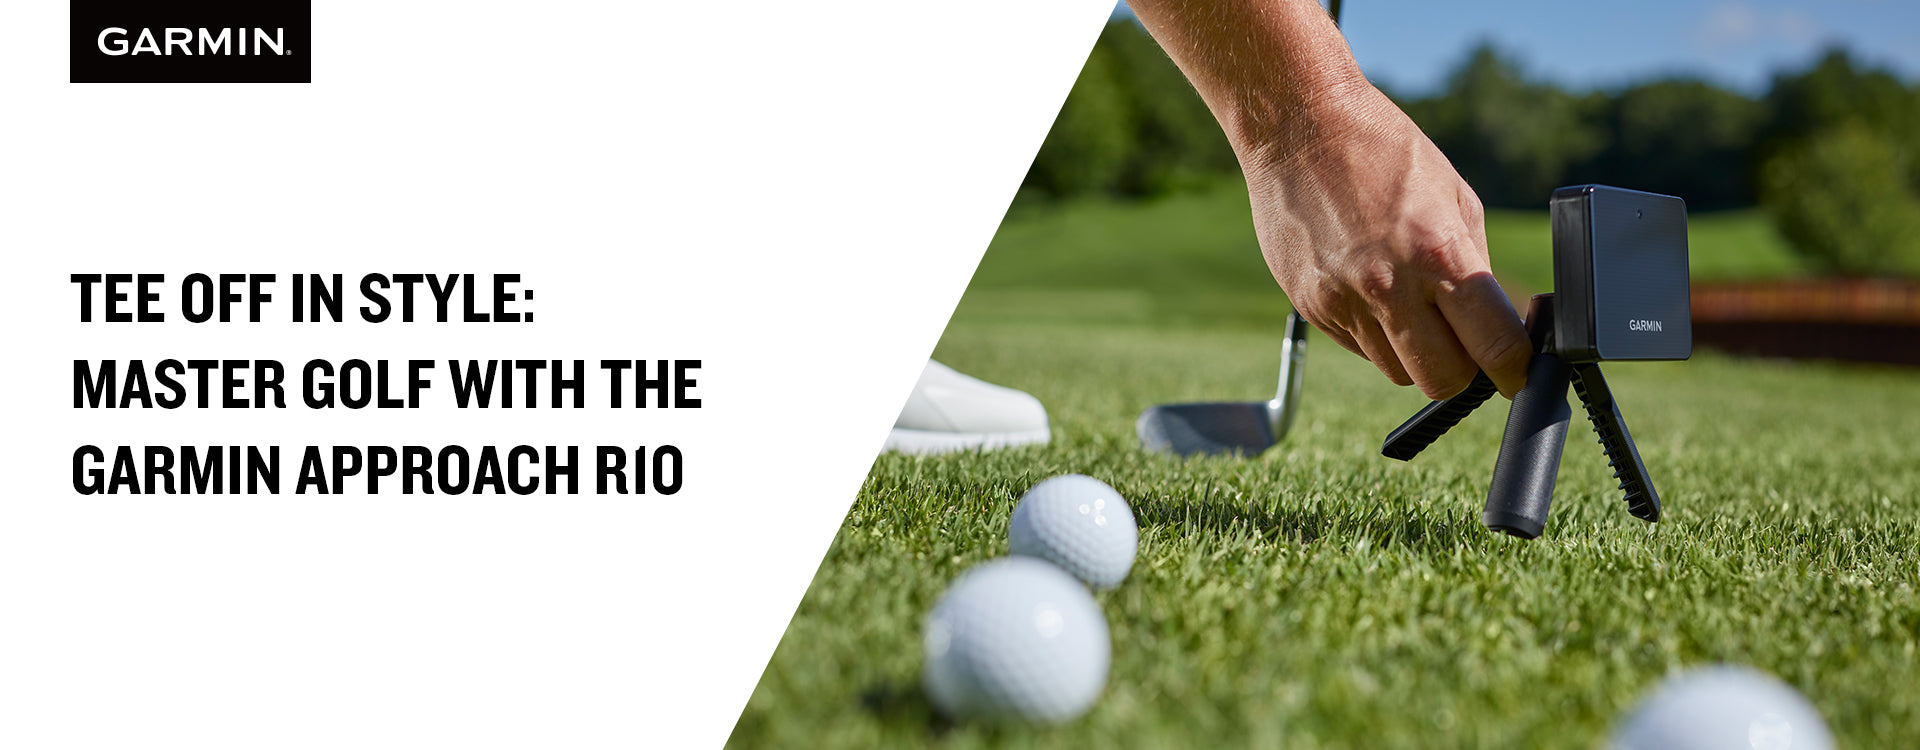 Tee Off in Style: Master Golf with the Garmin Approach R10